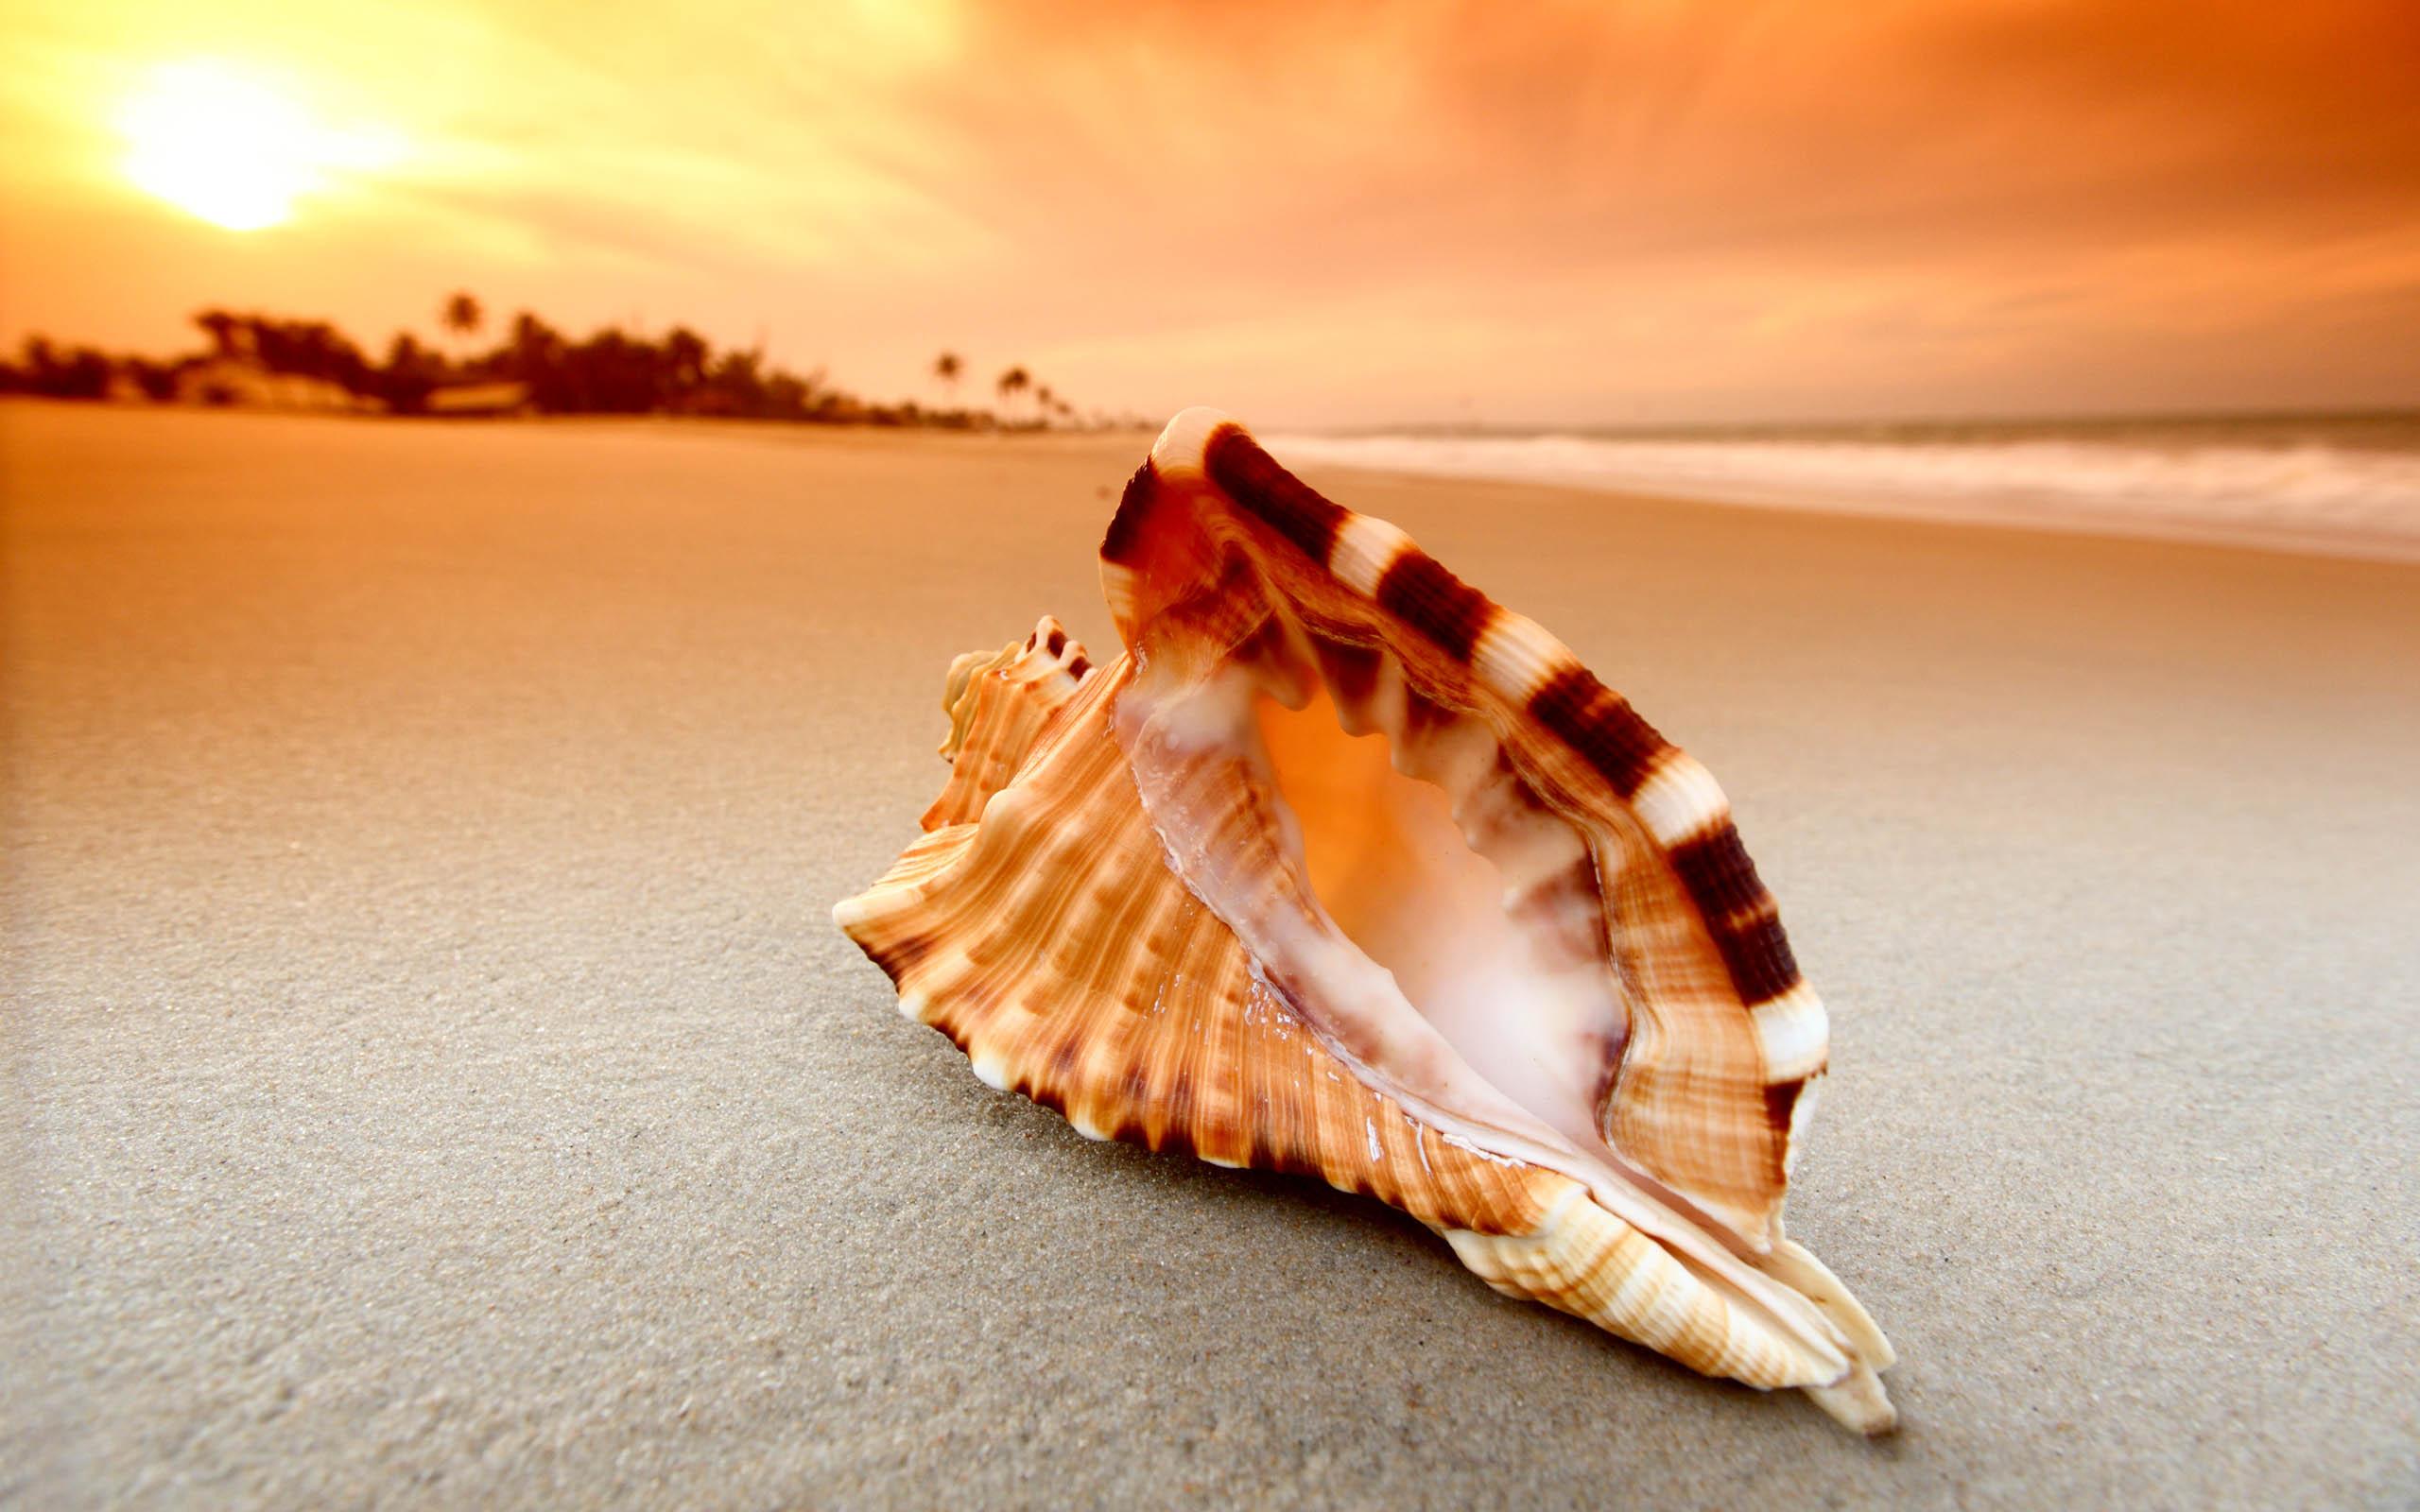 Shell Awesome HD Wallpapers 2015